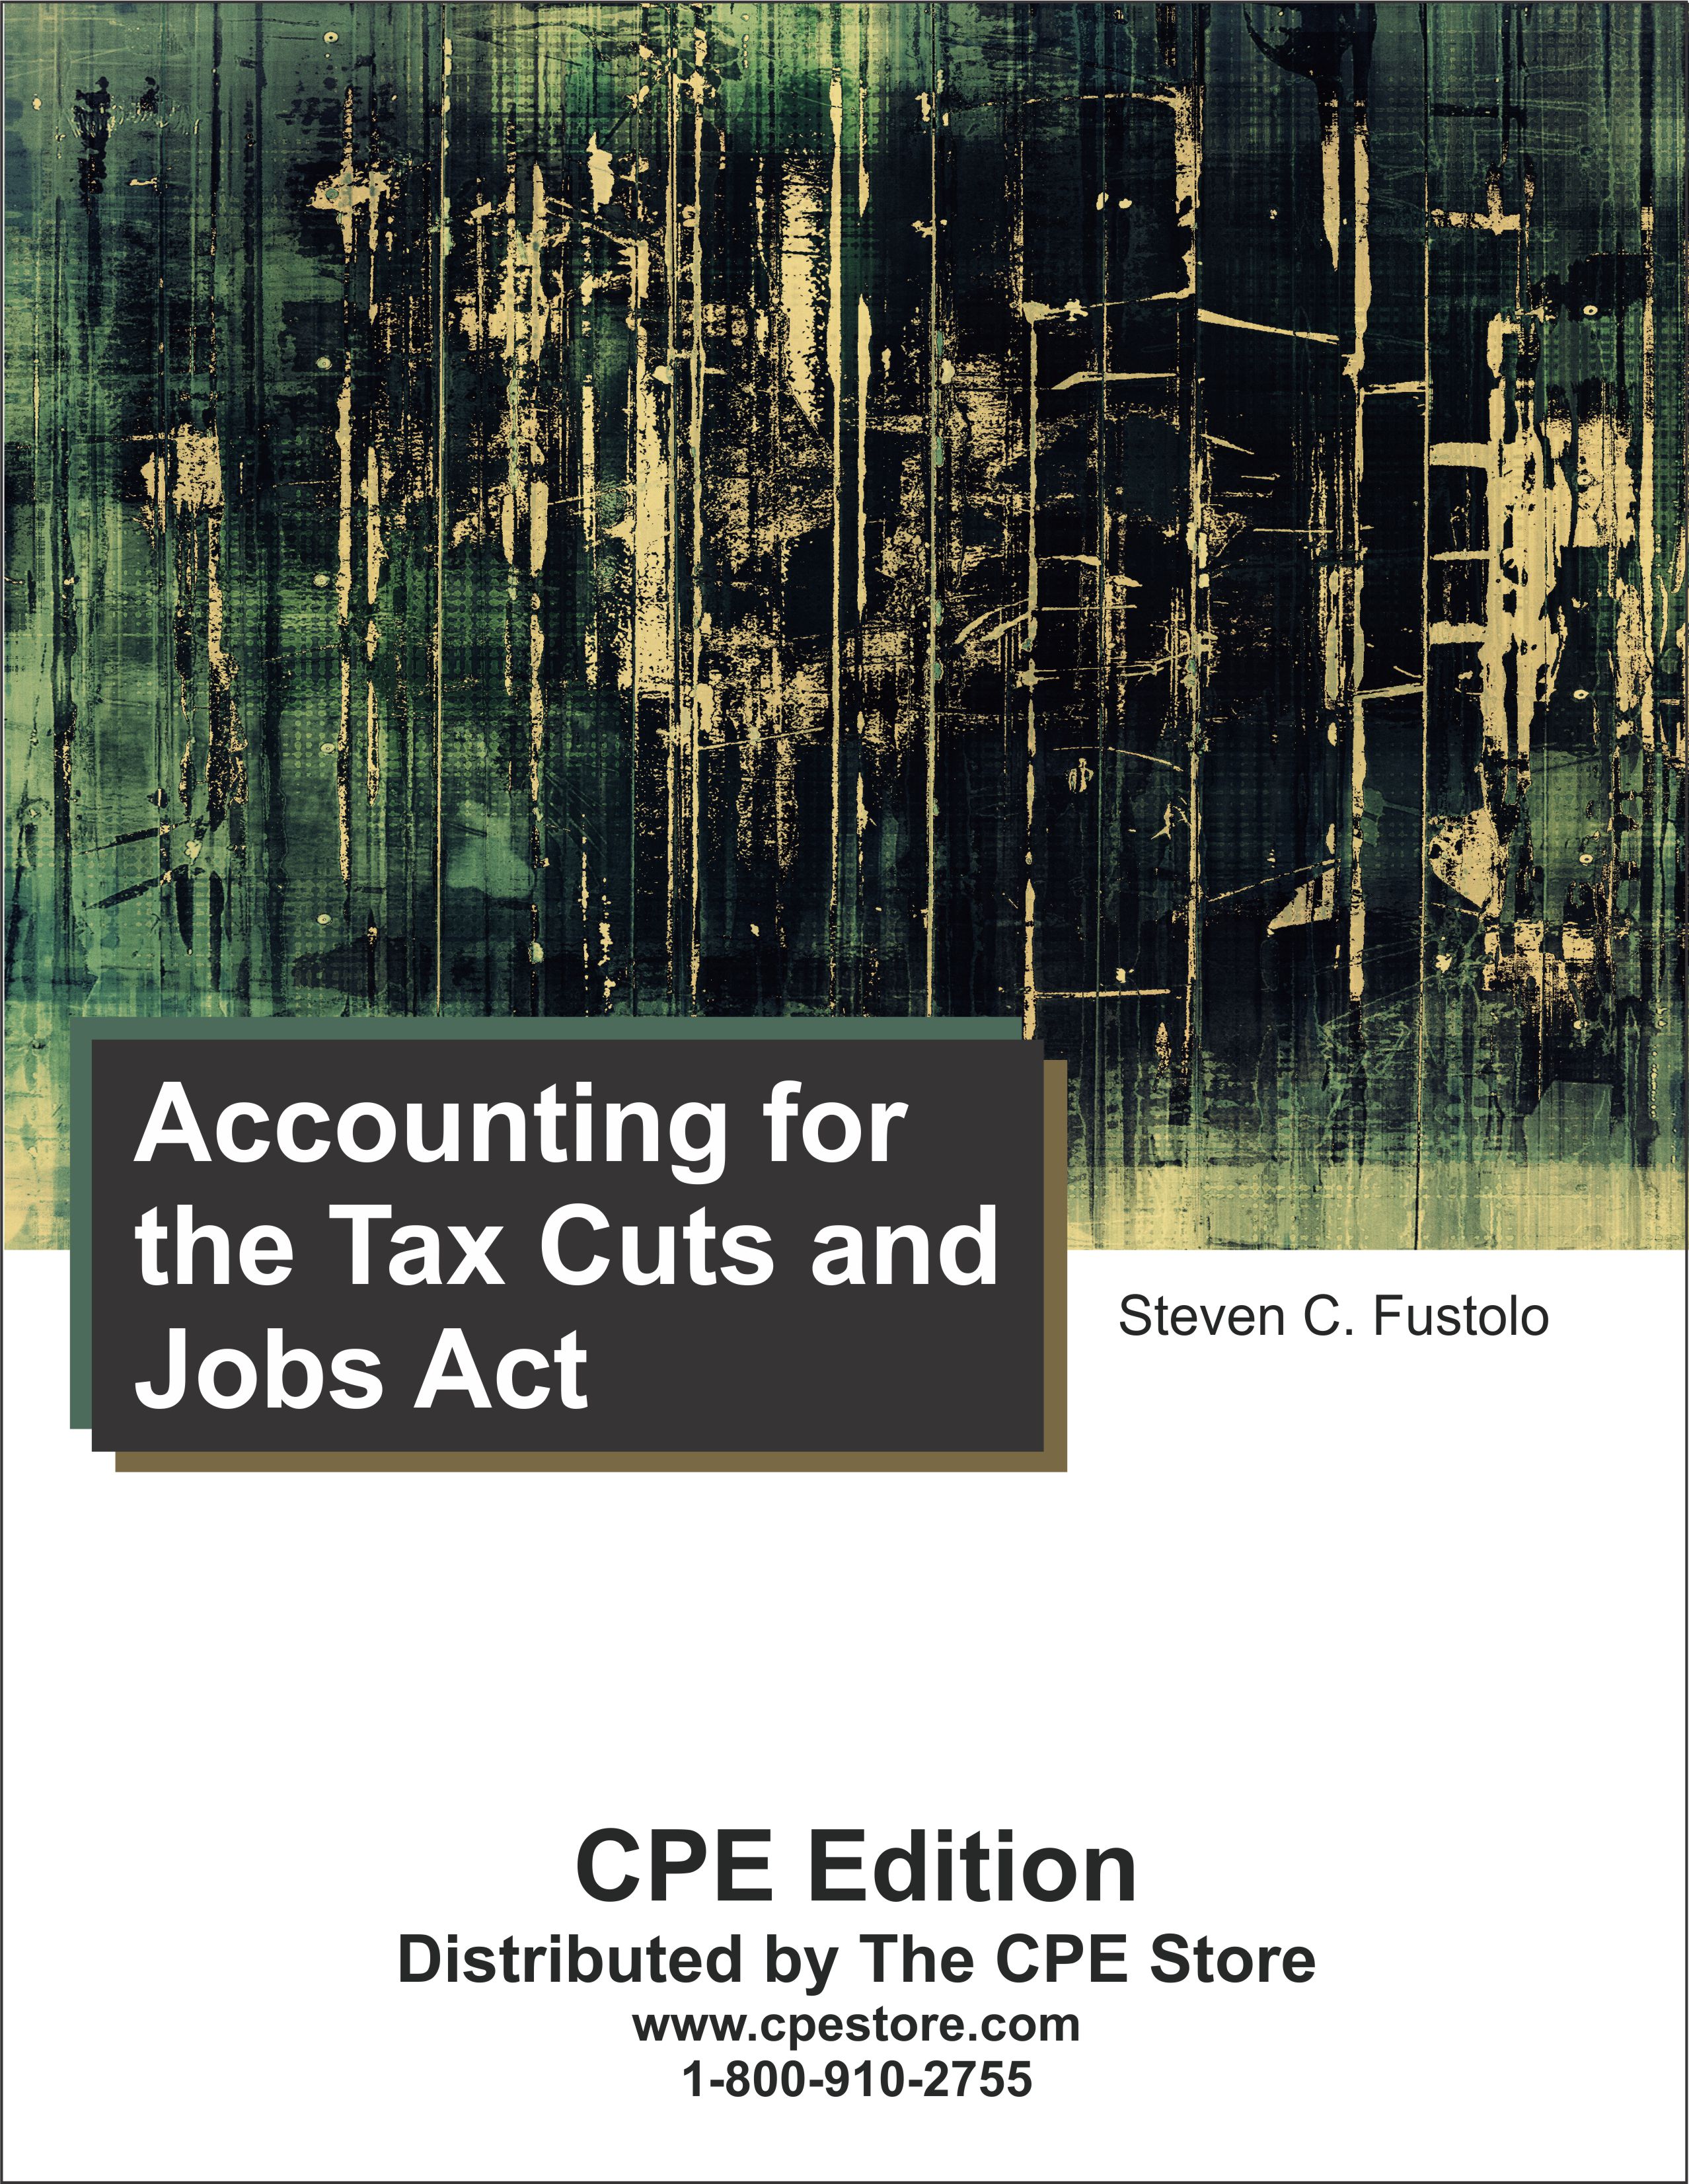 Accounting for the Tax Cuts and Jobs Act